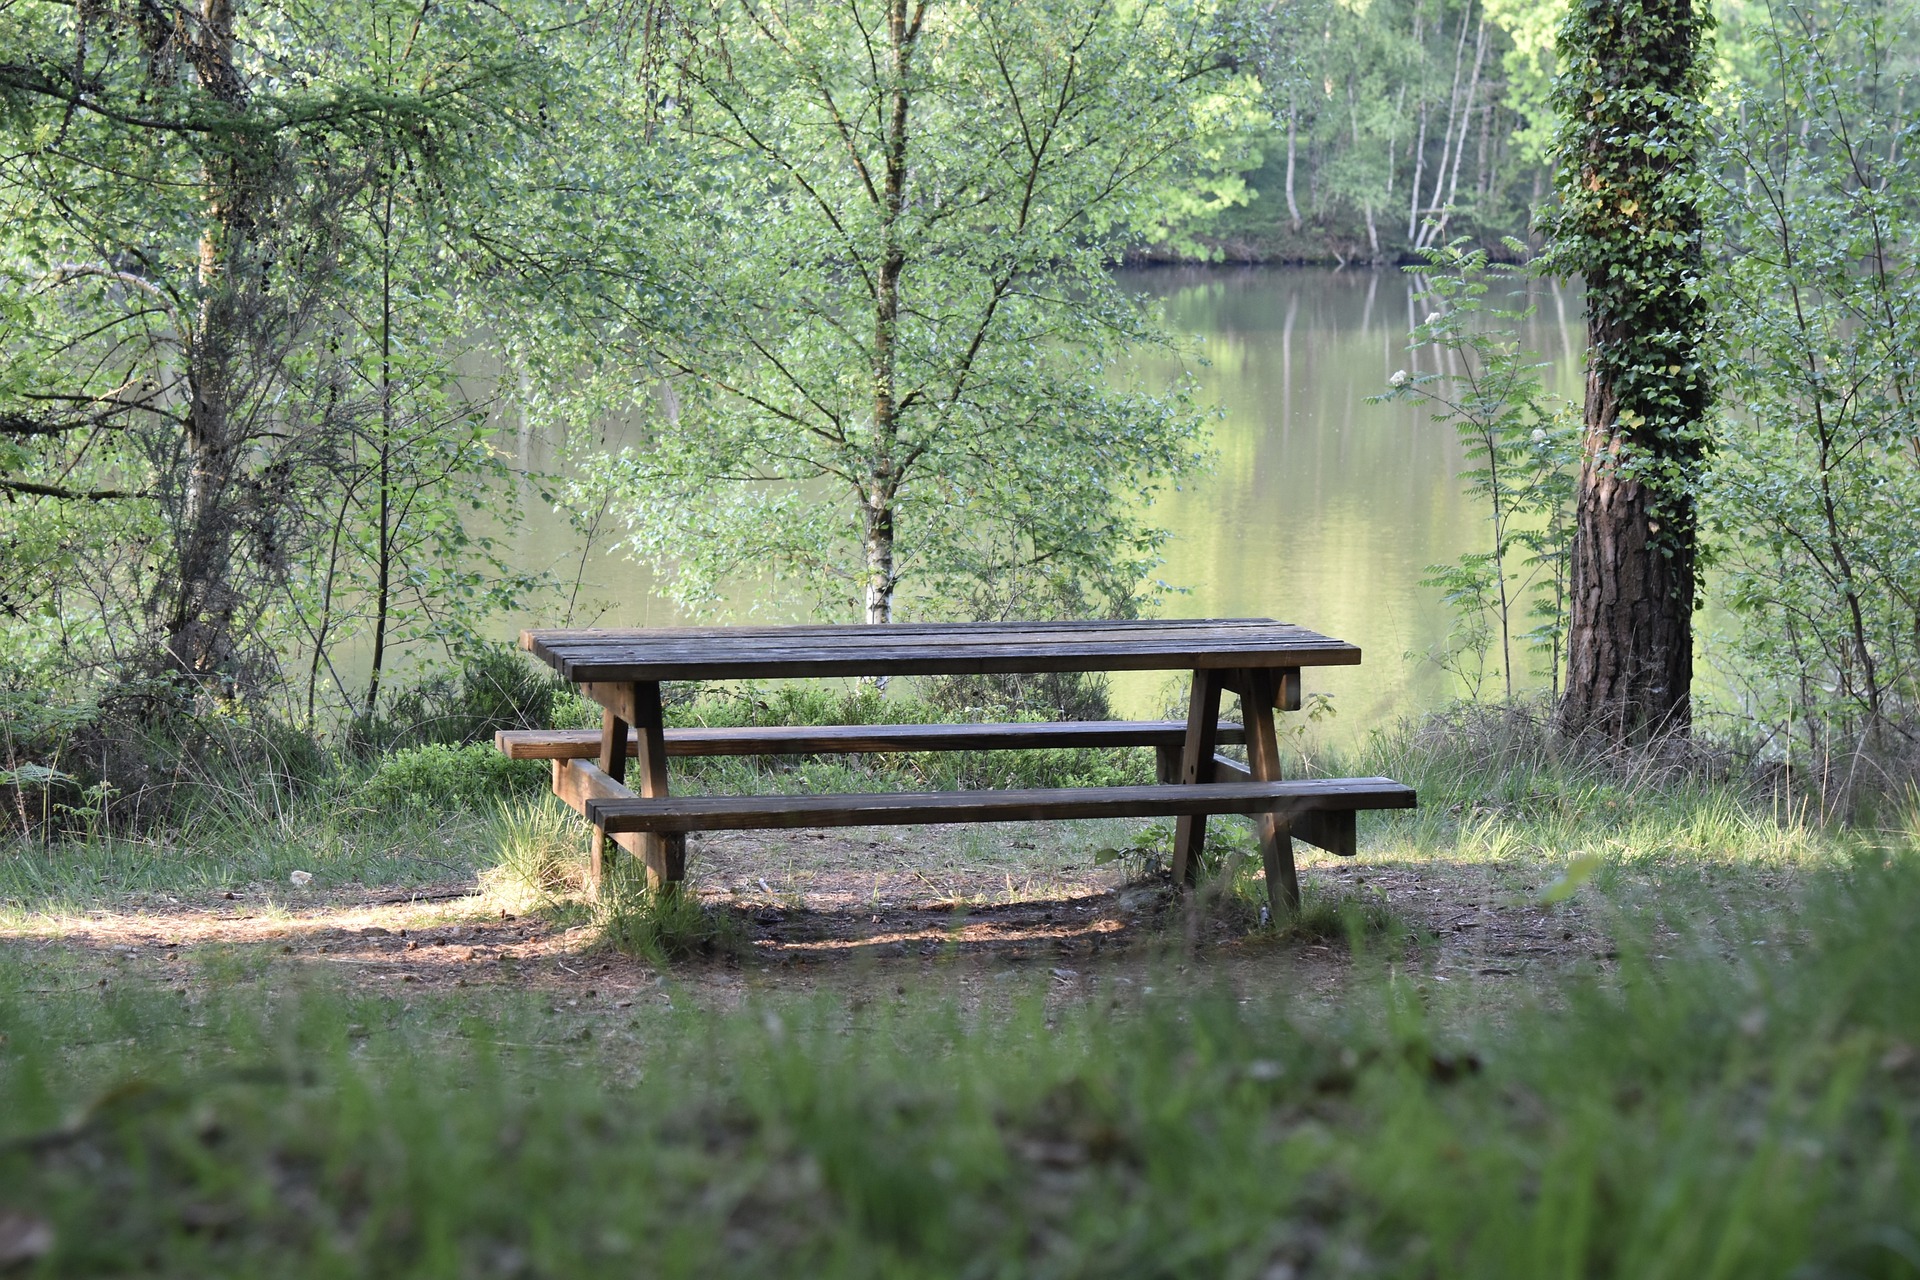 Picnic bench under trees nearby a lake